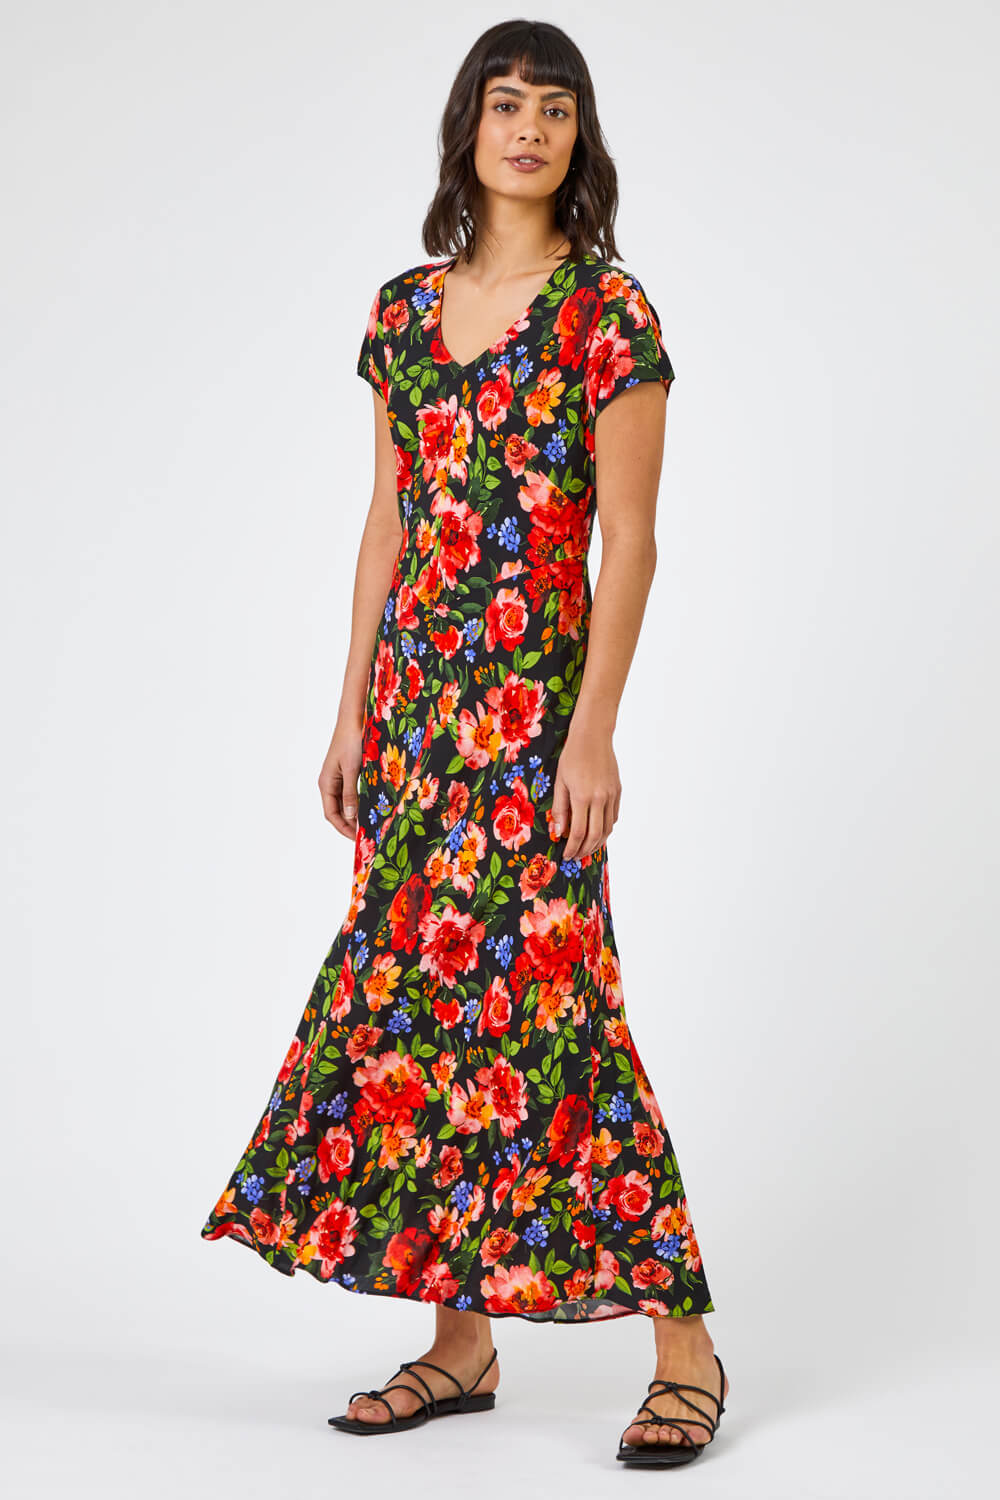 Red Floral Print Fit & Flare Midi Dress, Image 3 of 5